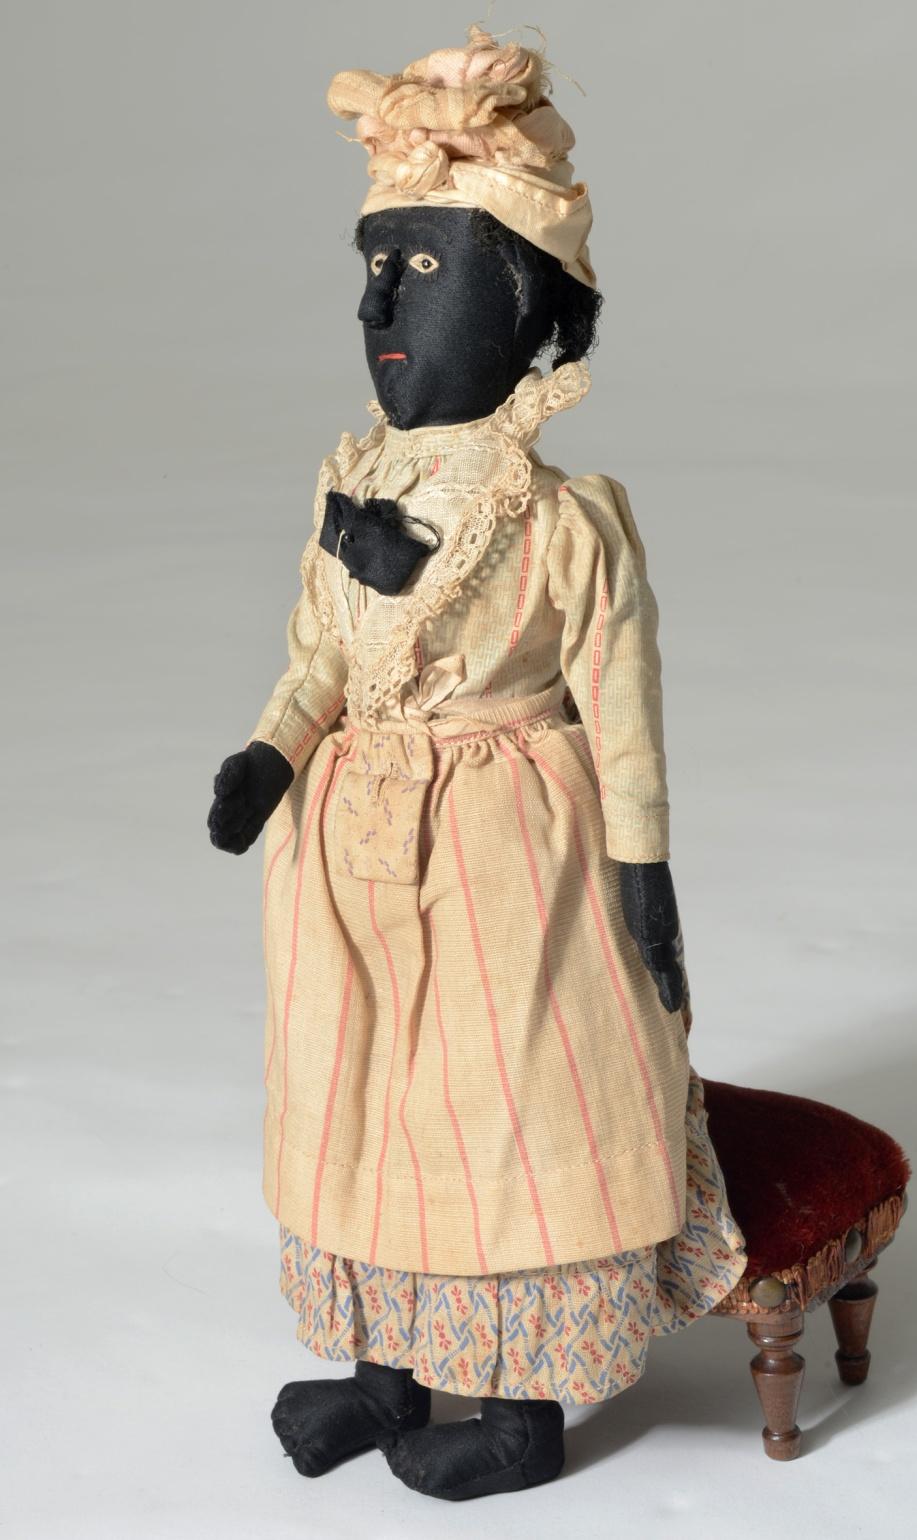 Charleston or Savannah Domestic, circa 1880-1890 Evaluate each doll within the context of material culture and the decorative arts produced during the time period in which the doll was created.